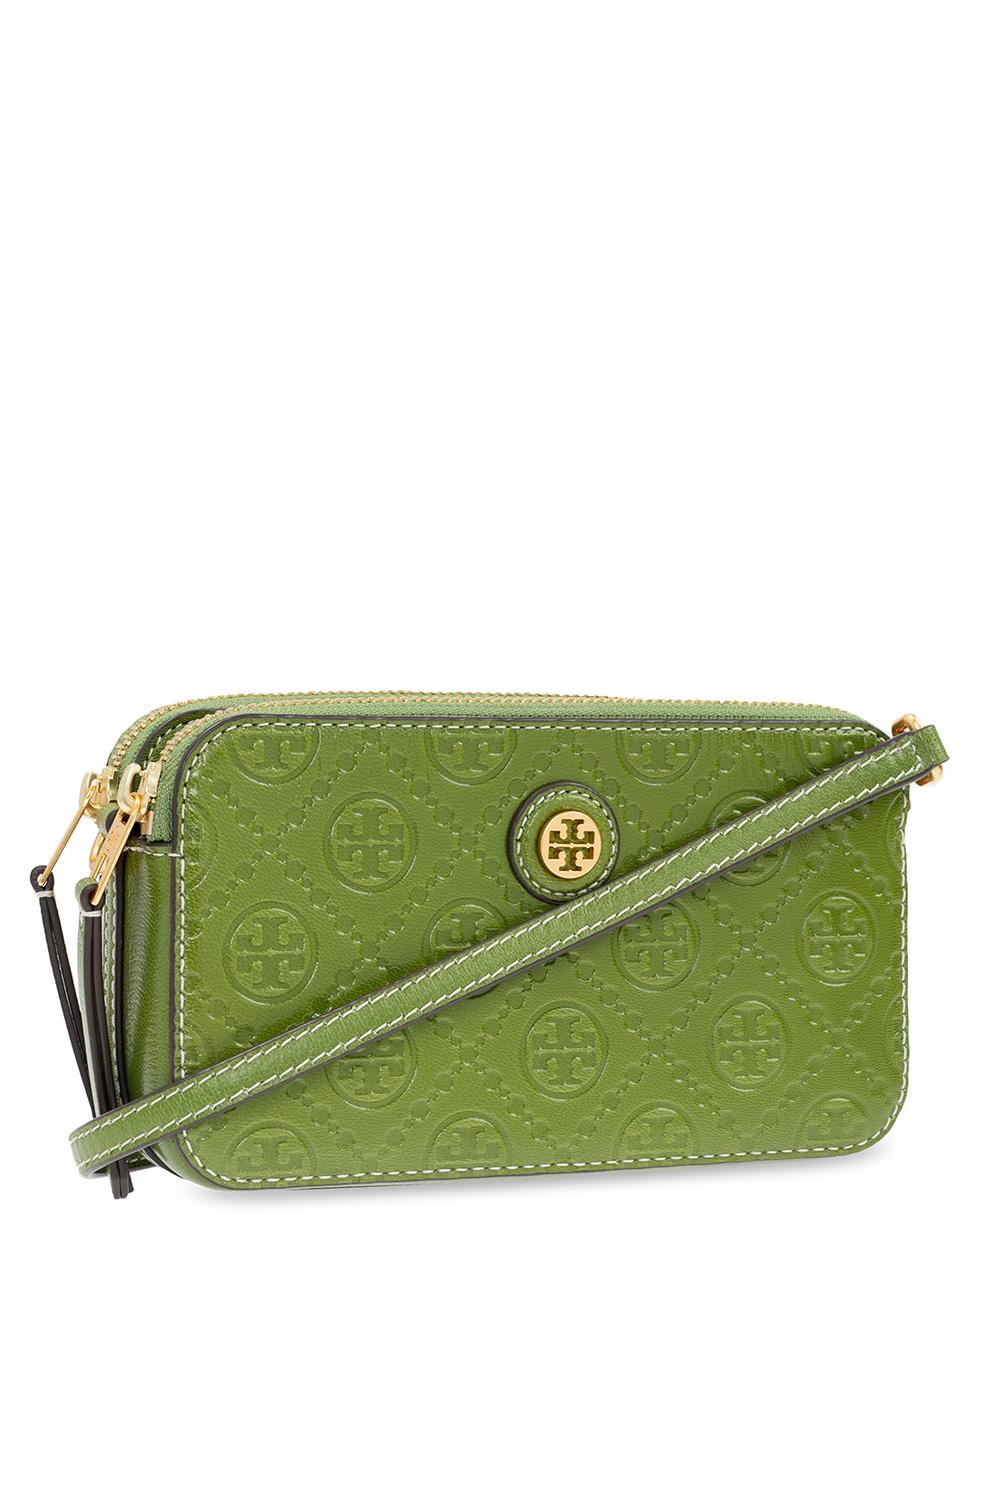 Tory Burch T Monogram Leather Double-zip Mini Bag in Green | Lyst